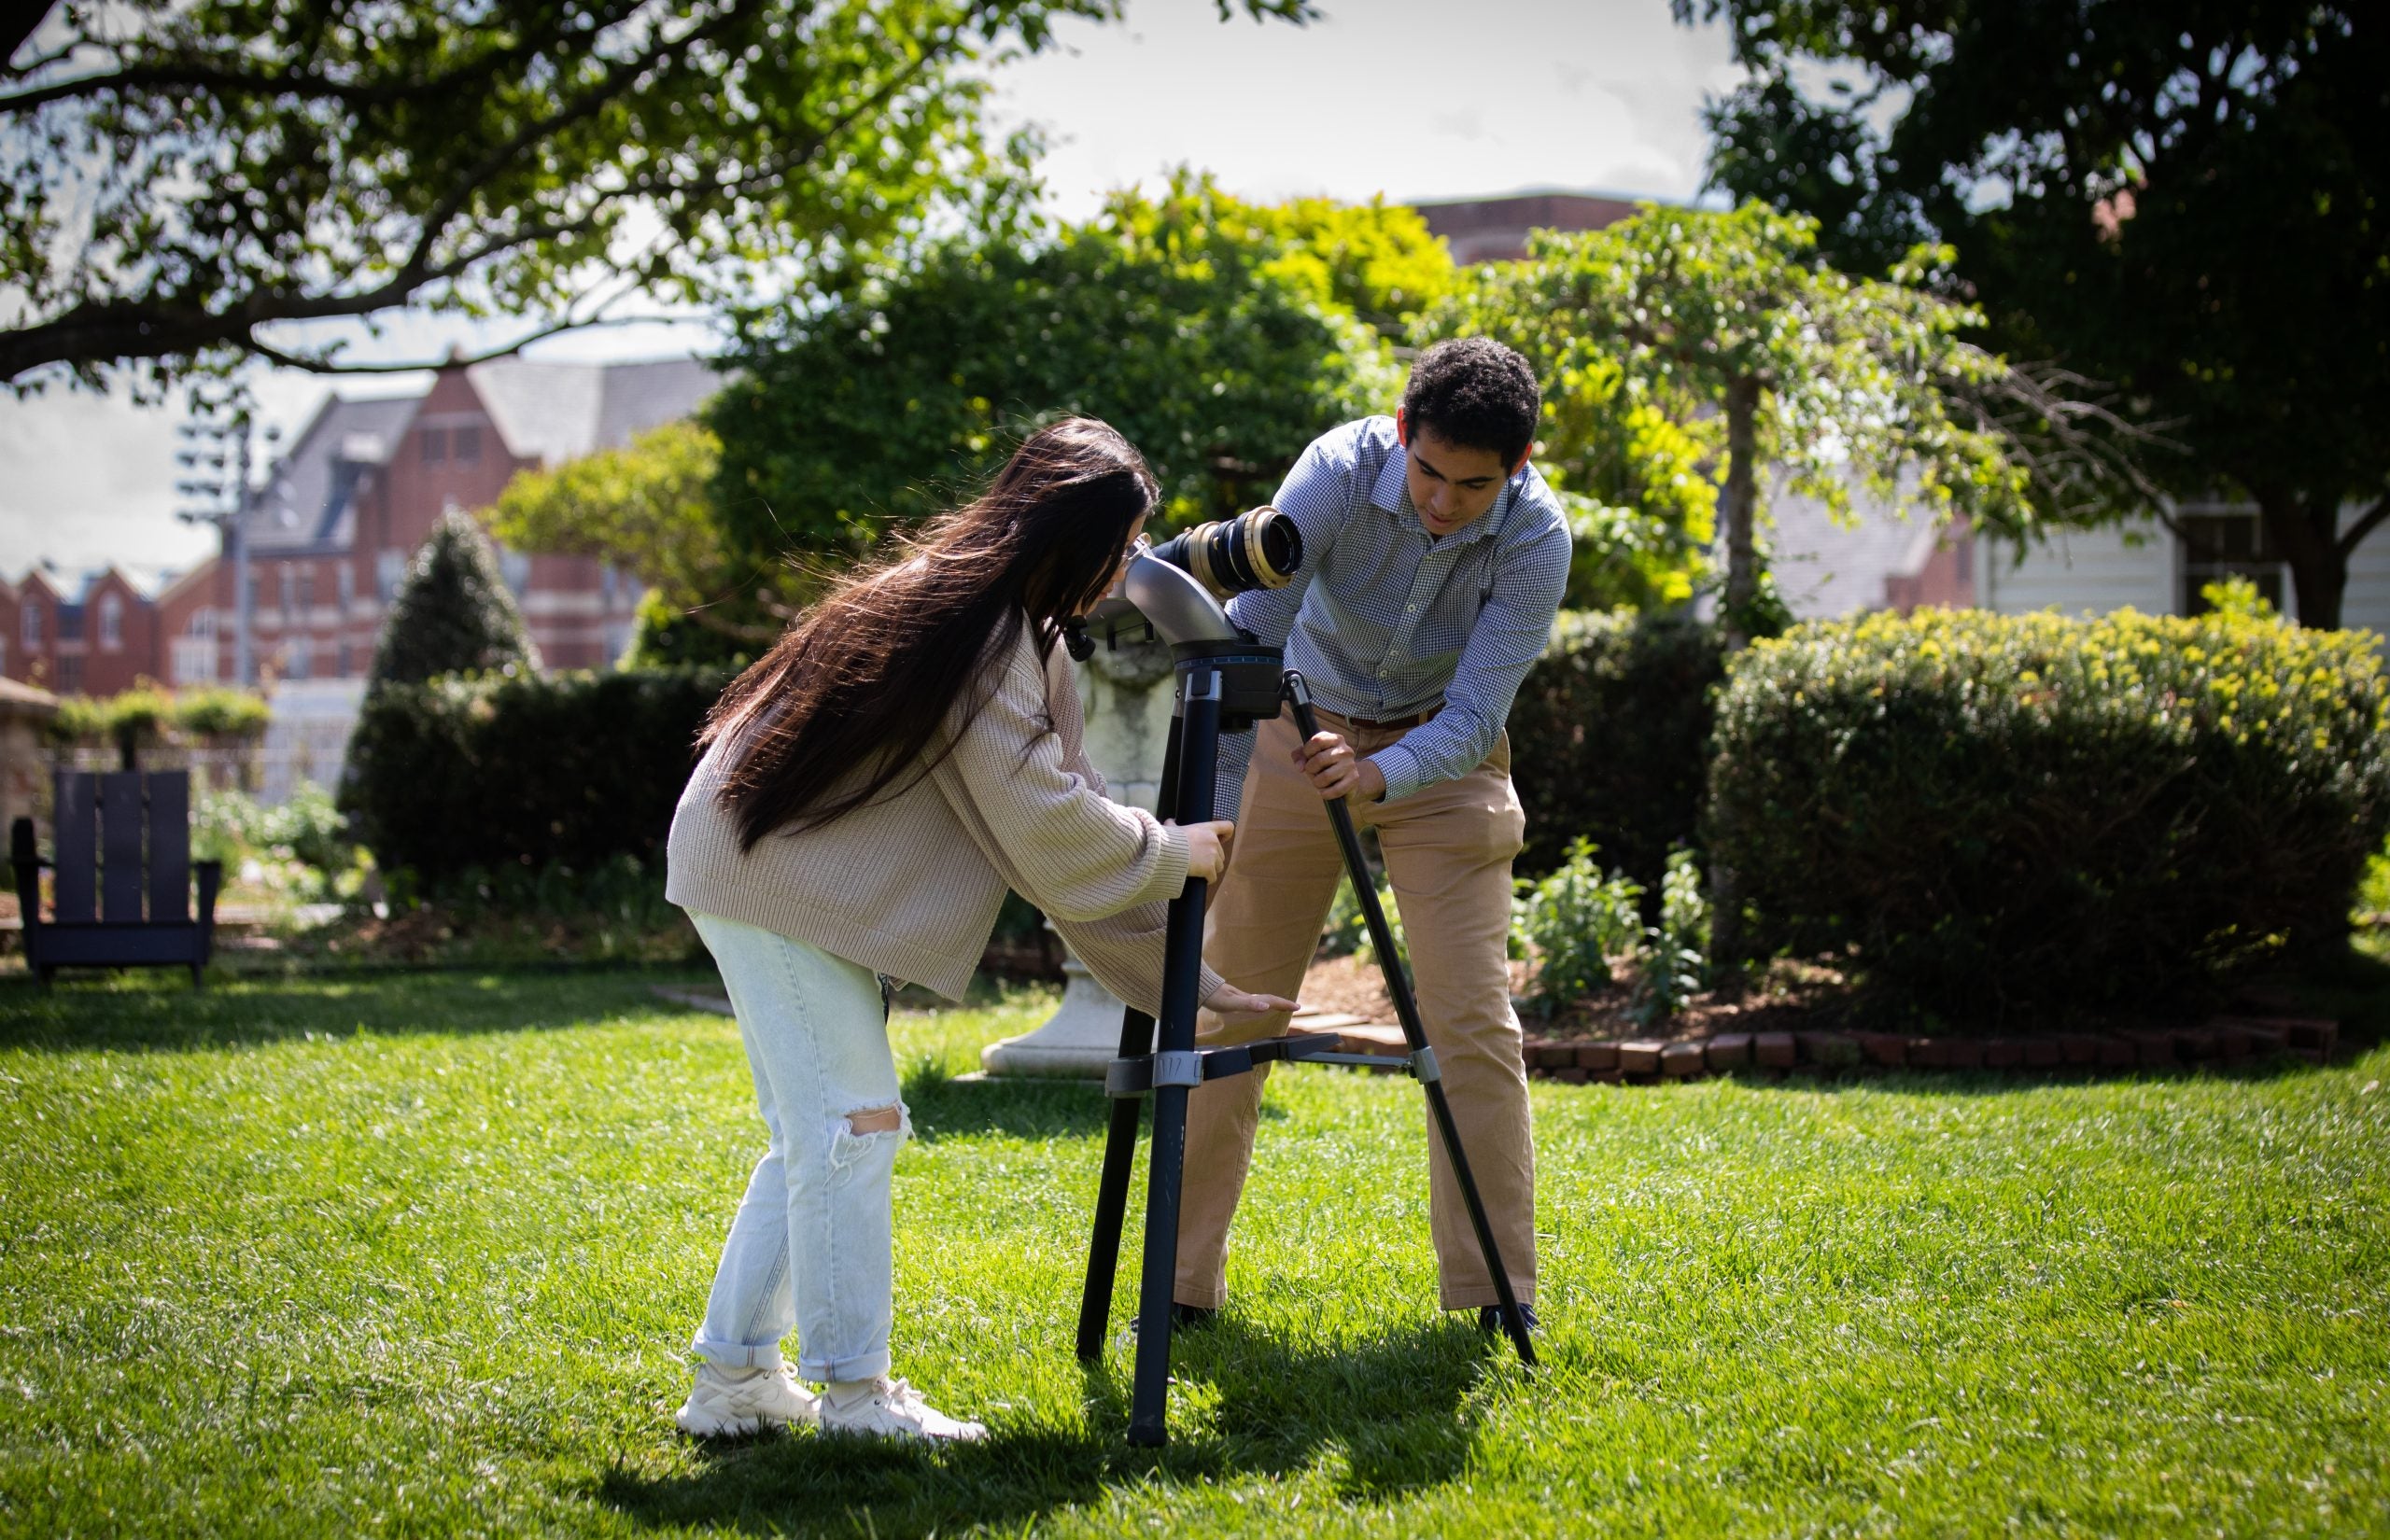 Two students set up a telescope in a green lawn.